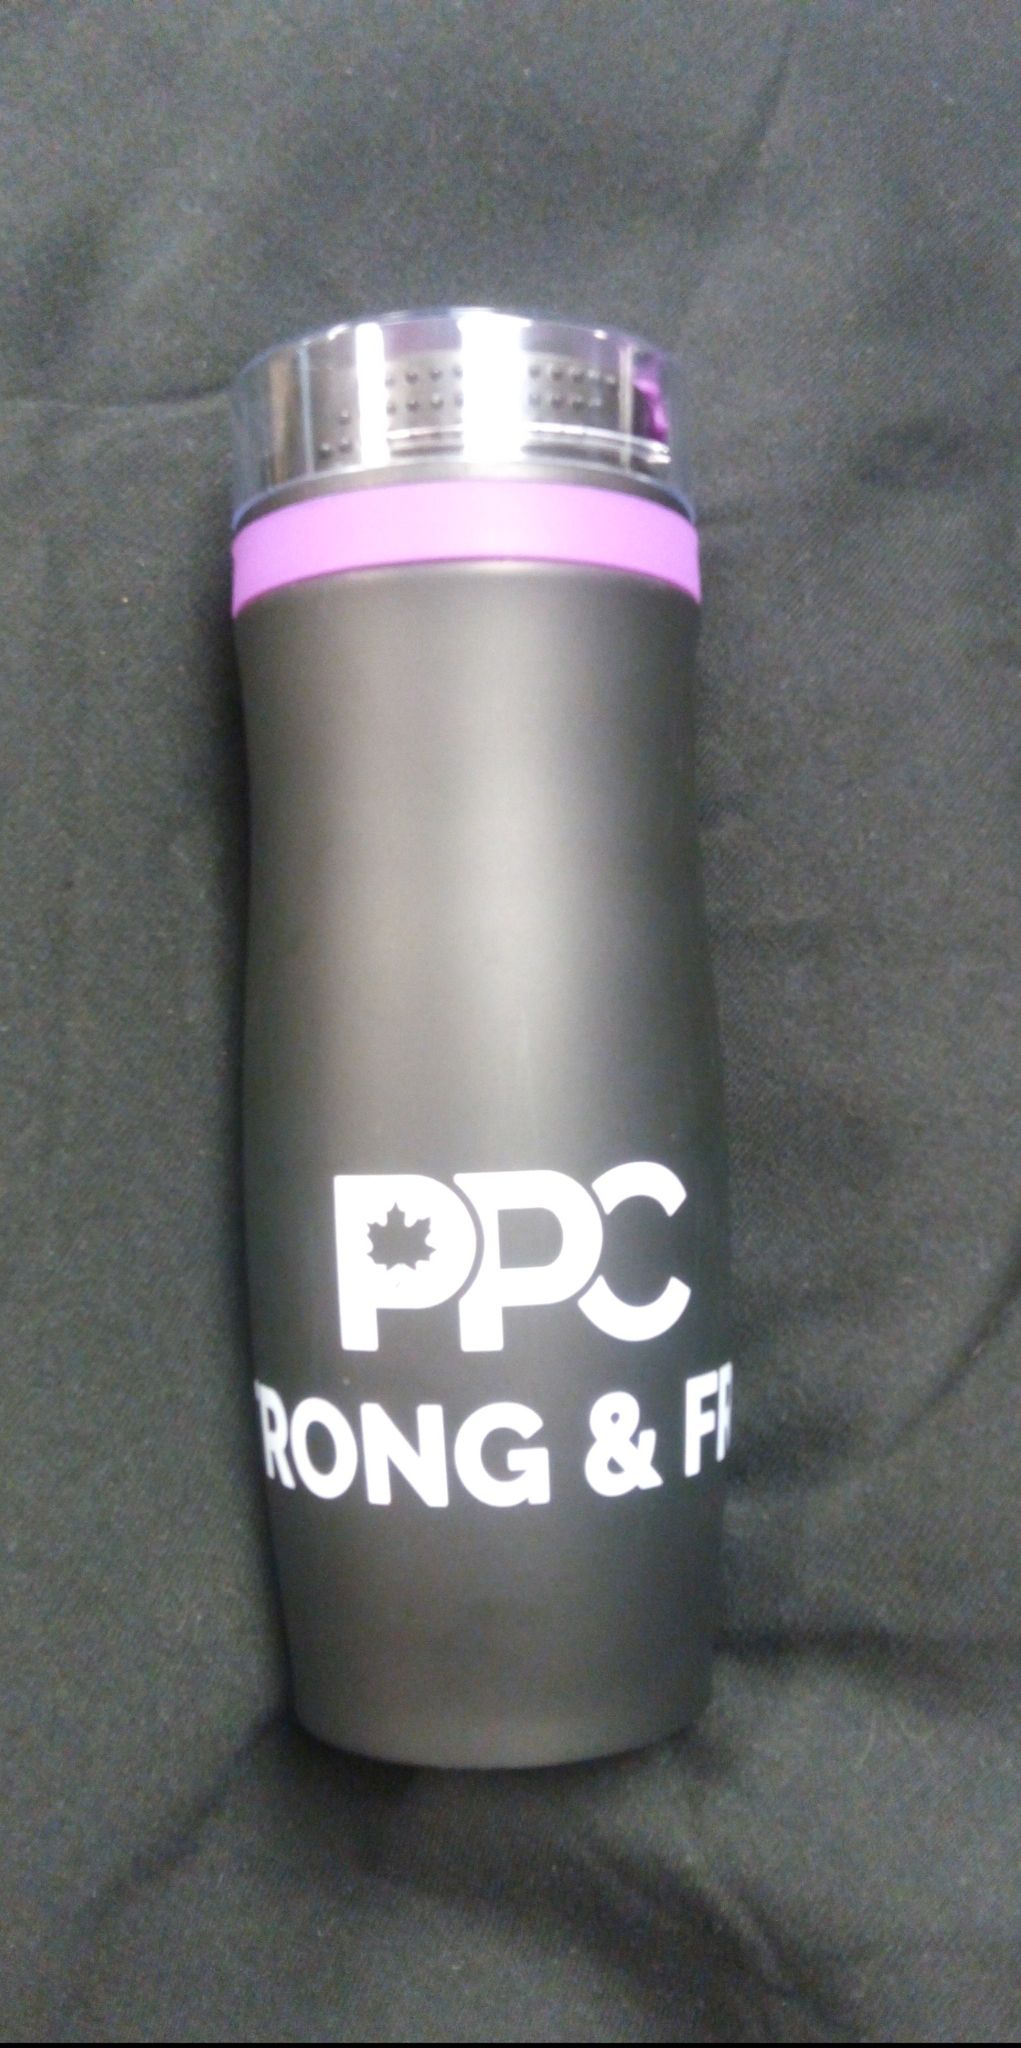 PPC Stainless Steel Mug With Lid